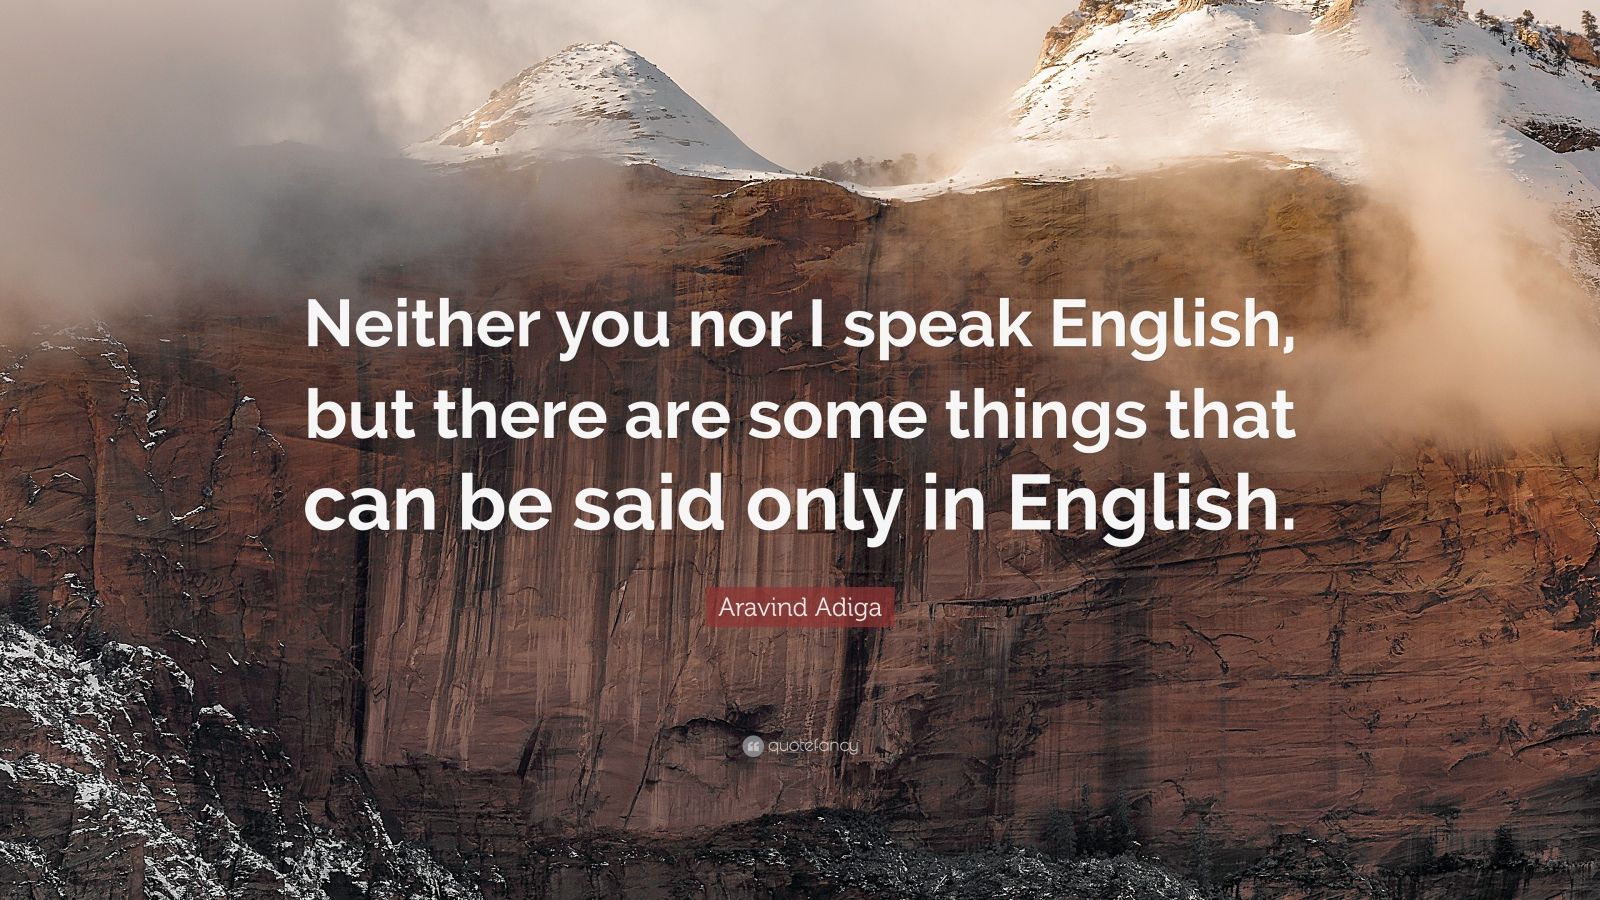 Aravind Adiga Quote: “Neither you nor I speak English, but there are ...